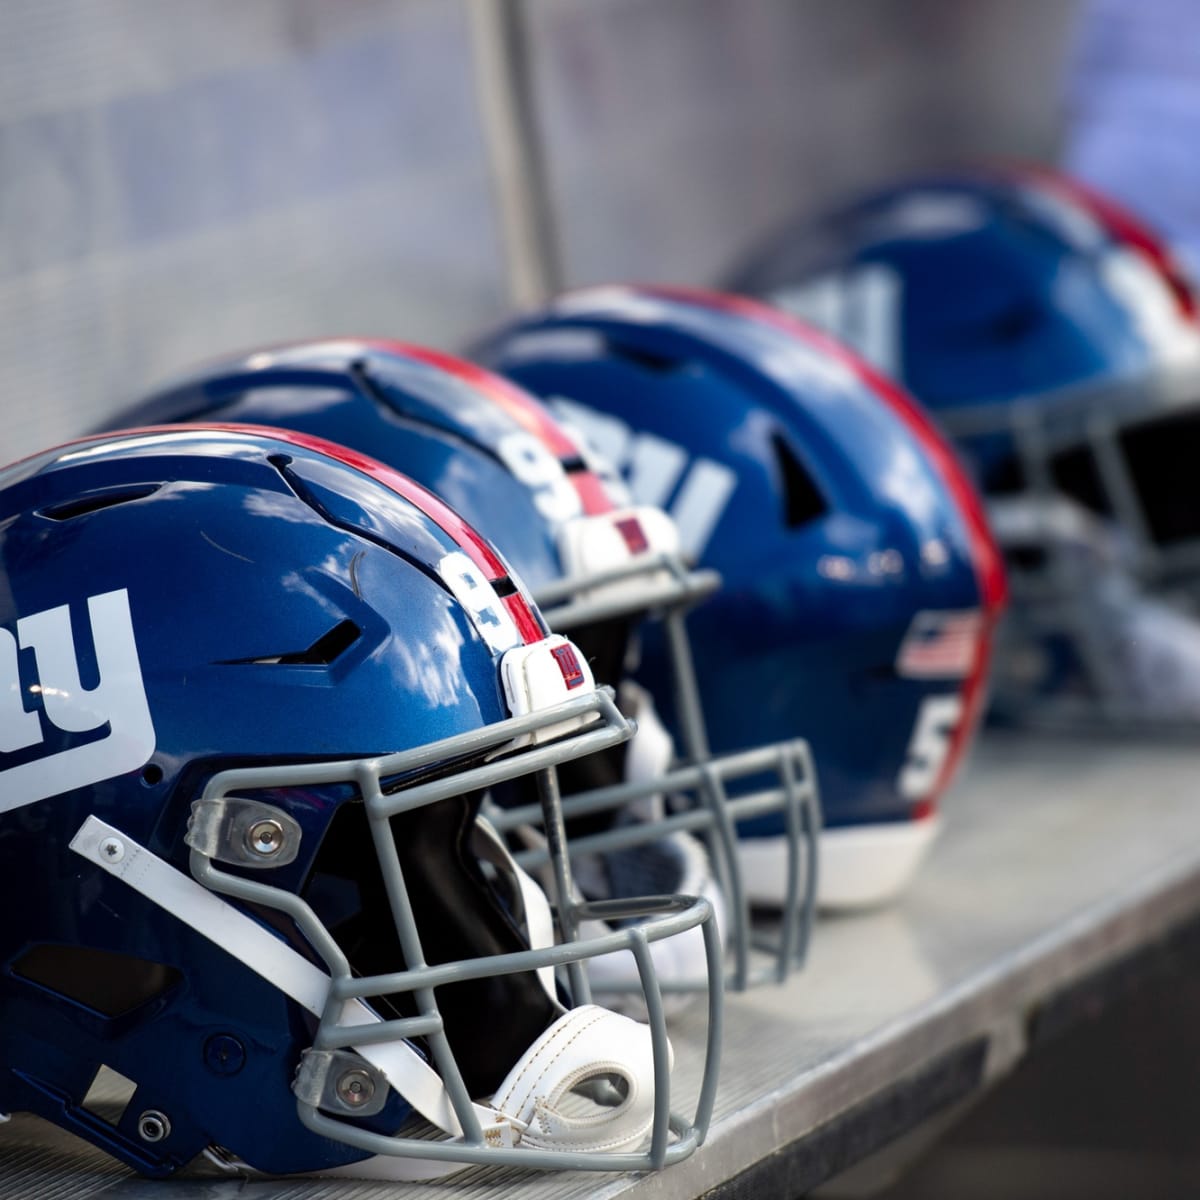 Pat's Perspectives: Wrapping Up the New York Giants Preseason